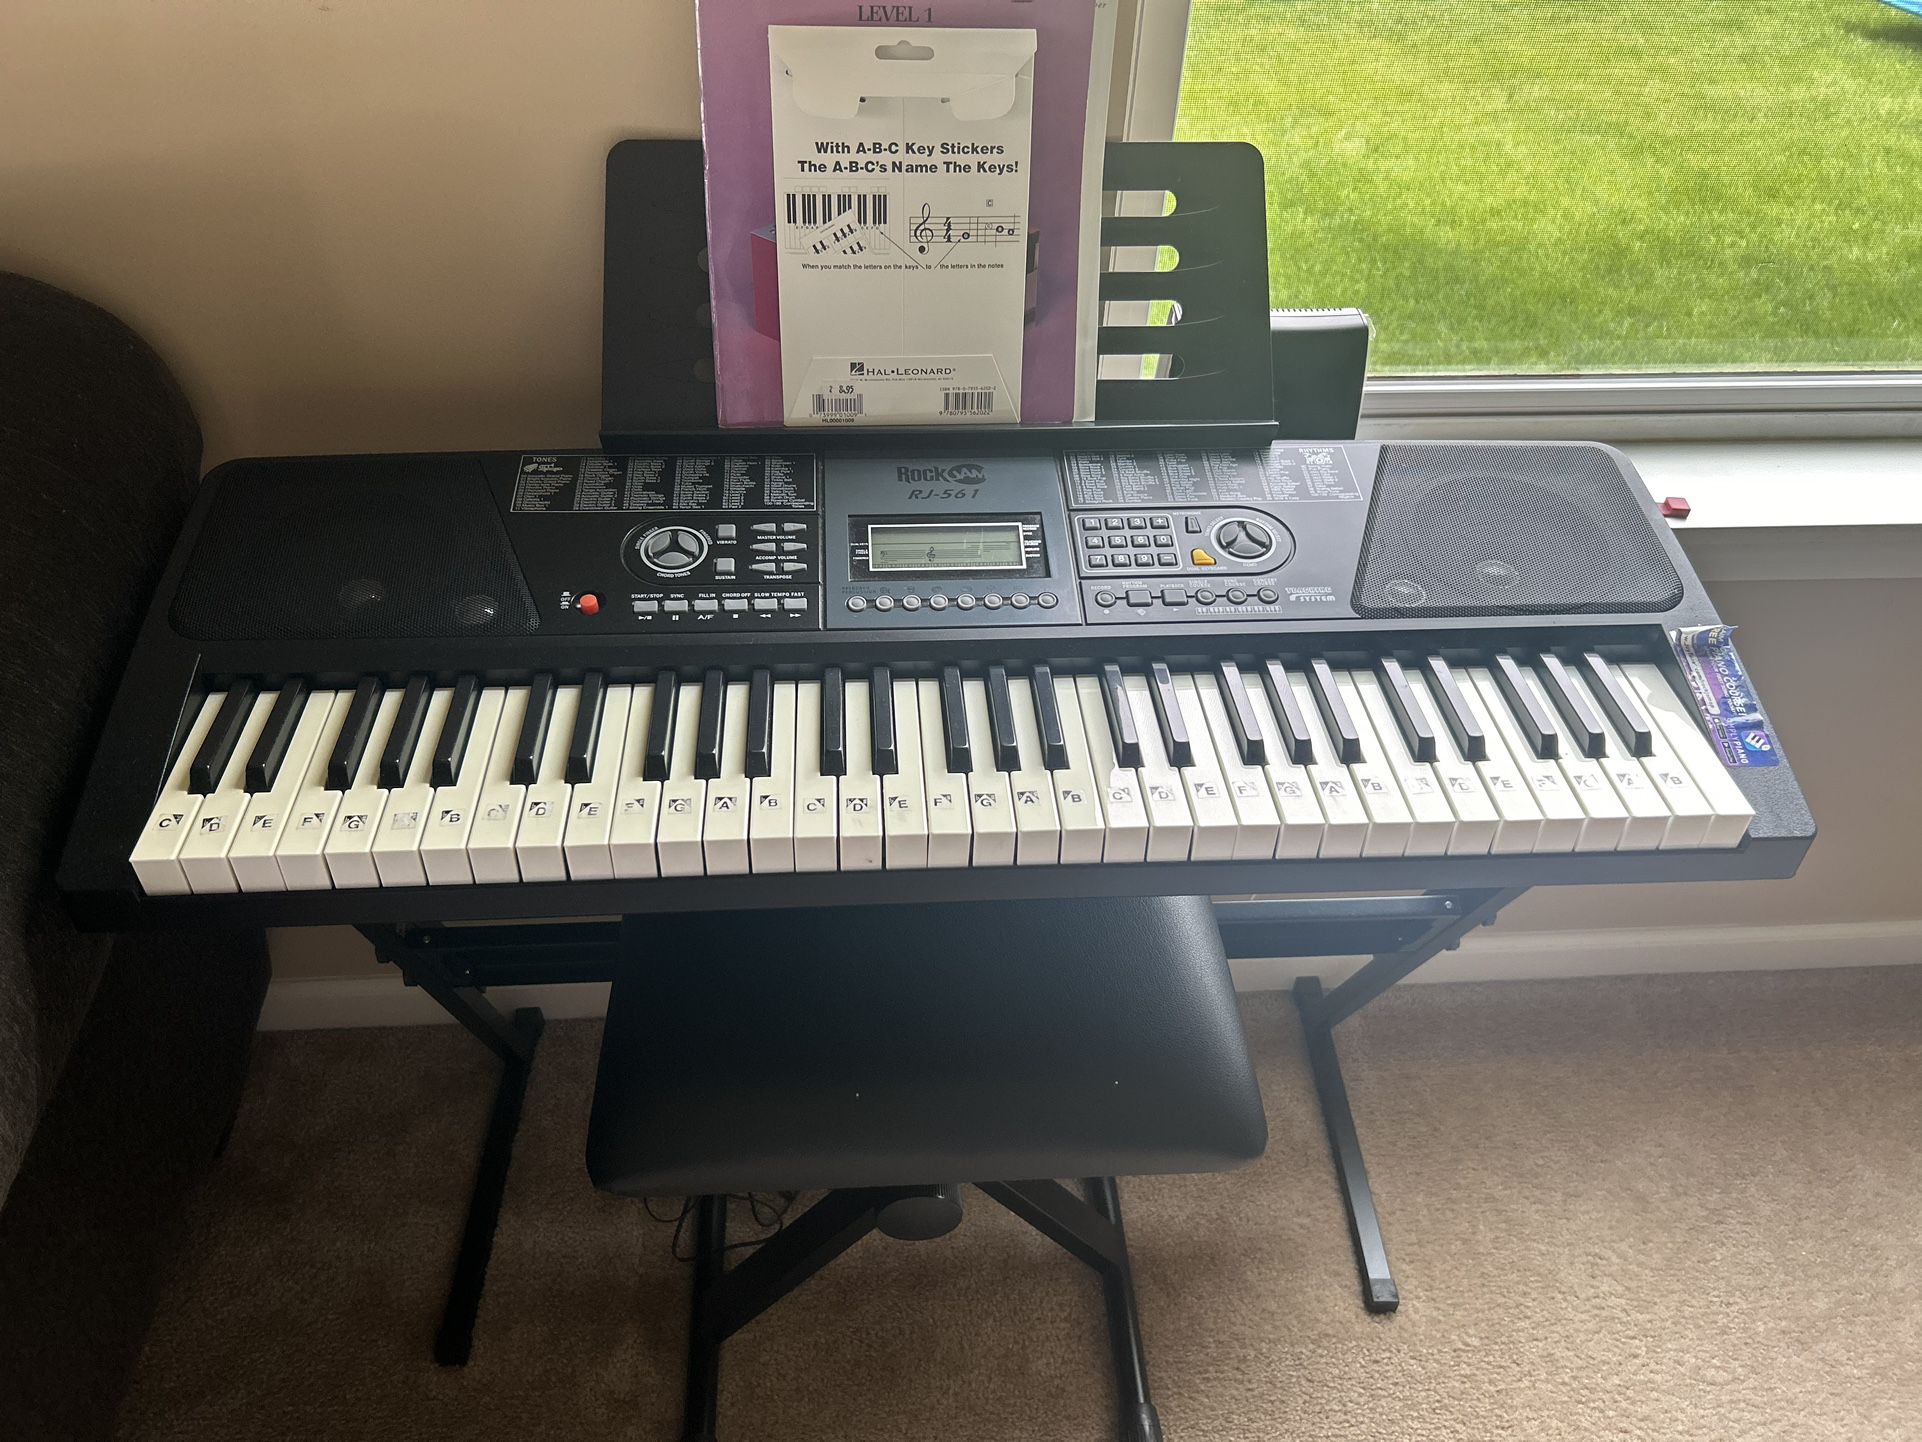 RockJam 61 Key Keyboard Piano With Stand, Bench, Power Cord, 2 Piano Books, Note Stickers.  Excellent Condition!  Like New